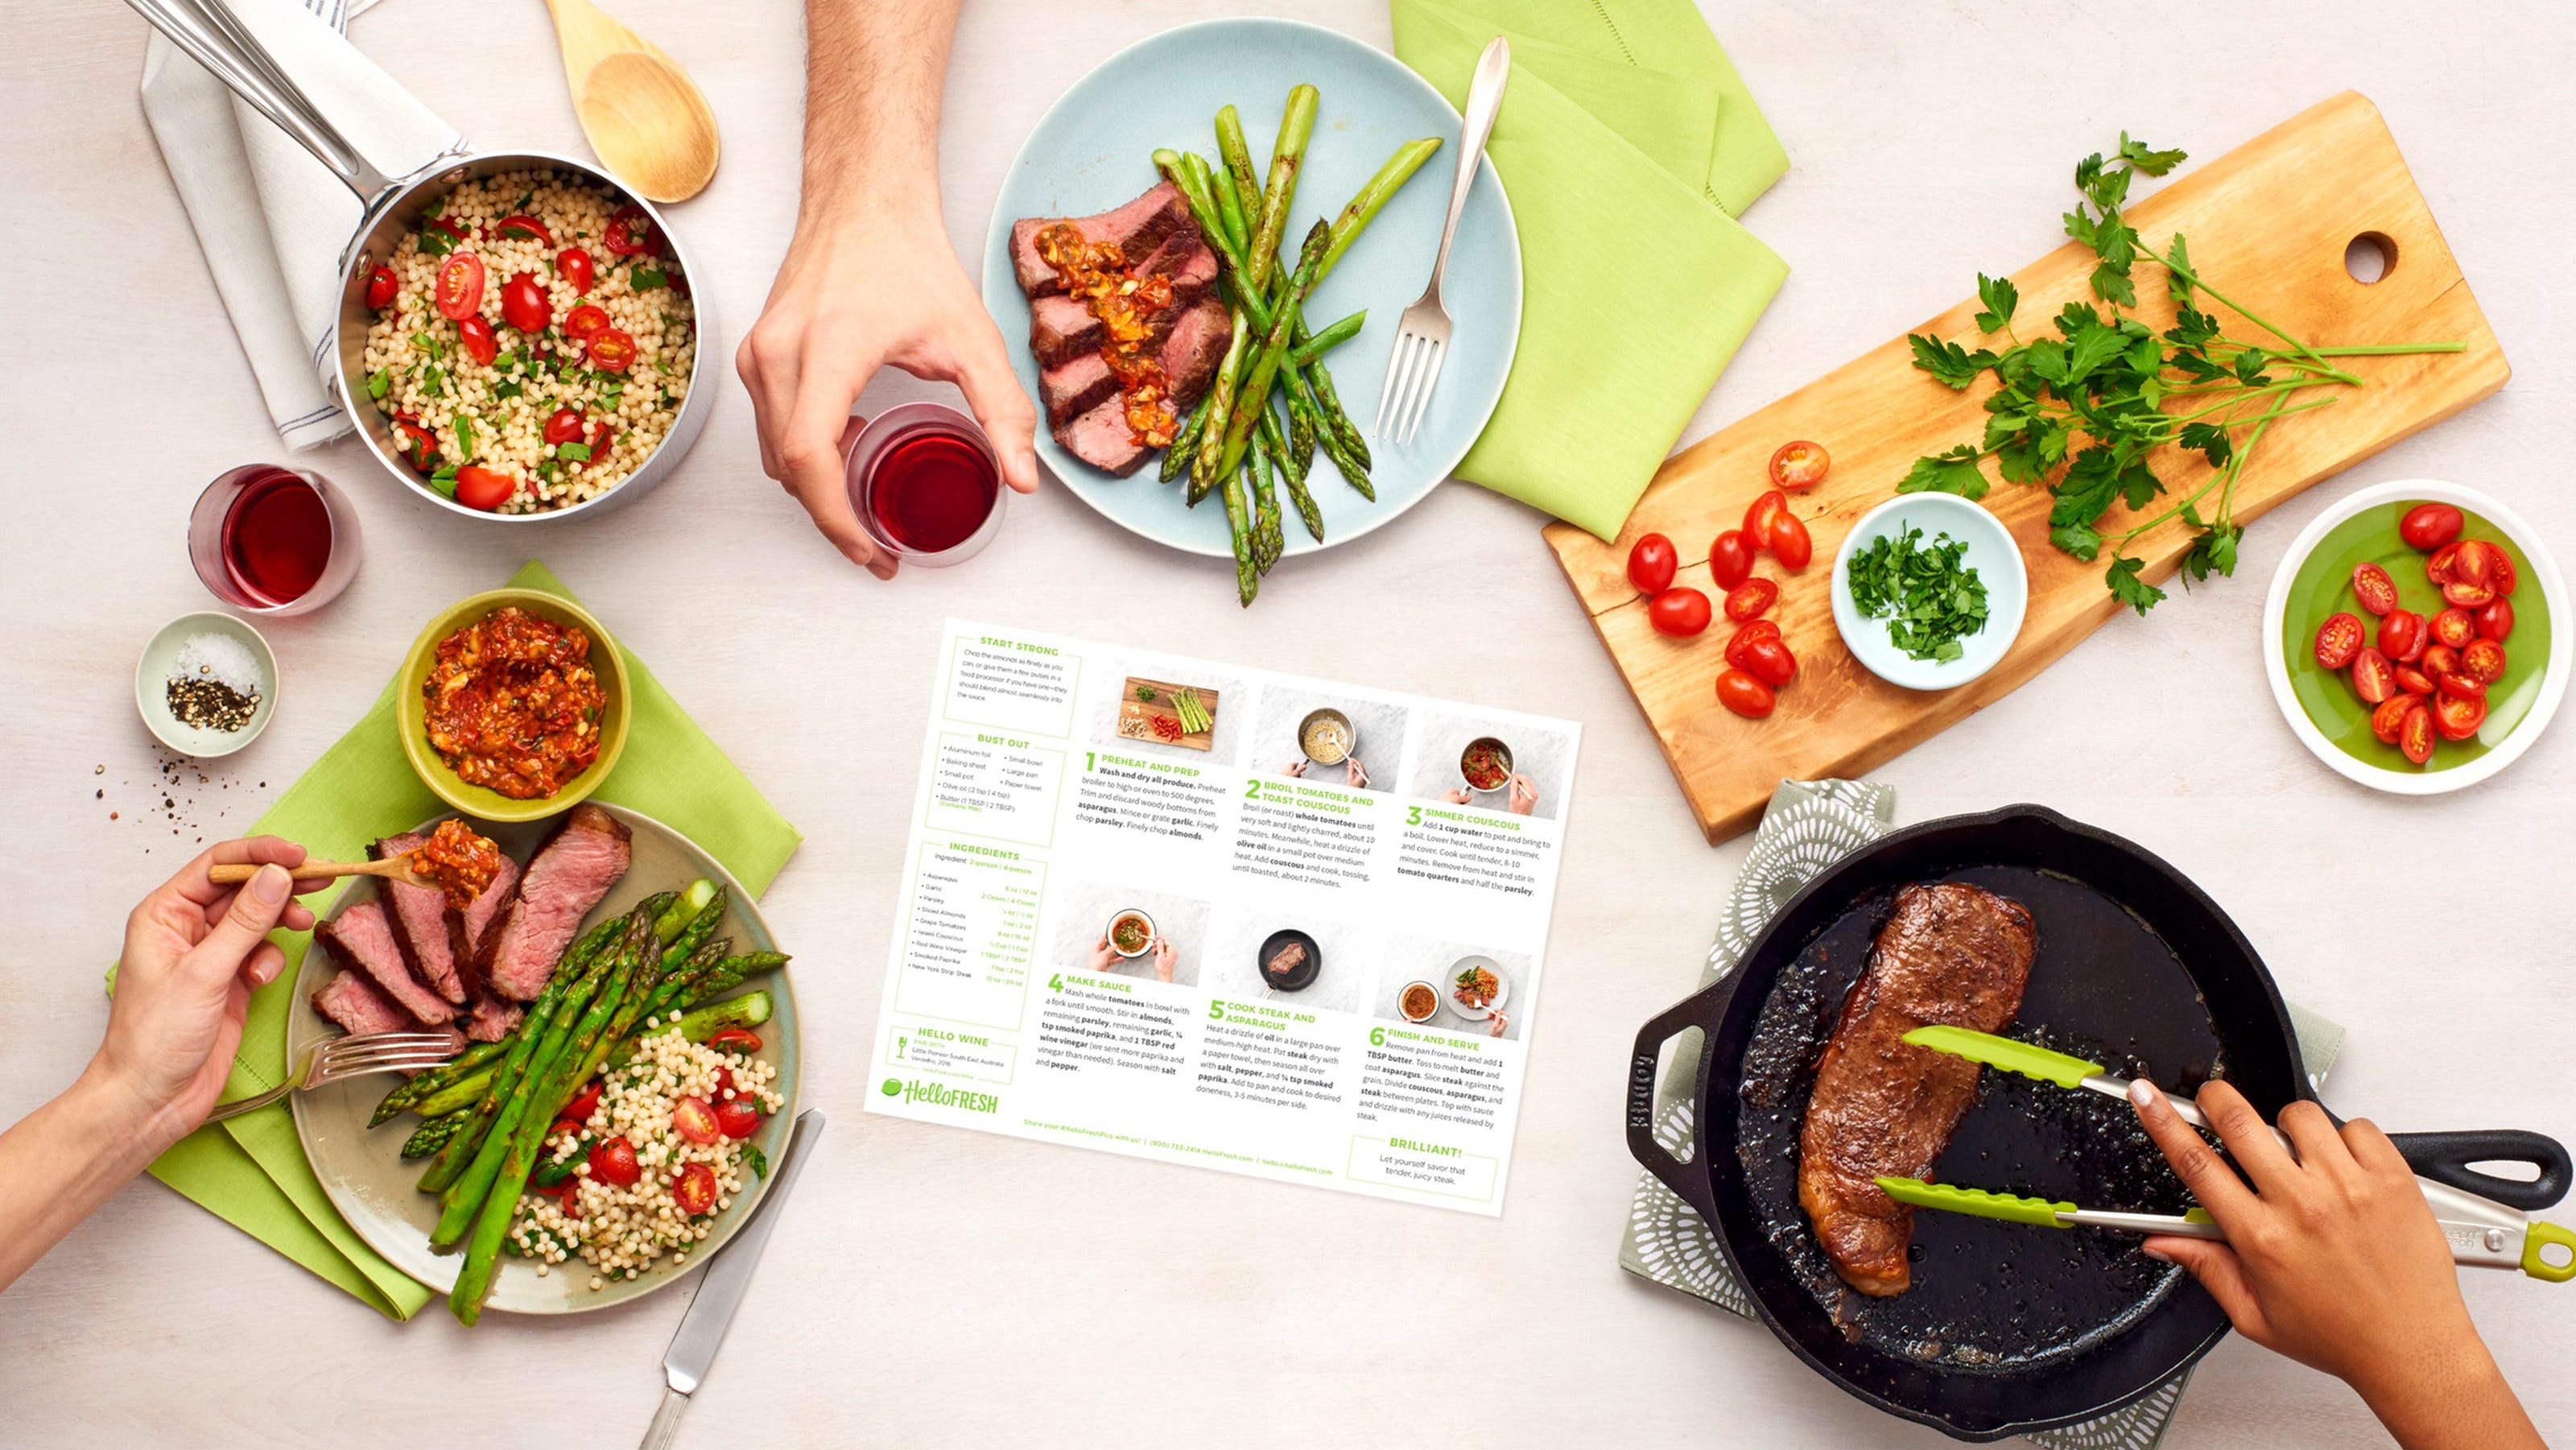 HelloFresh deal: Join today and get 16 free meals and surprise gifts